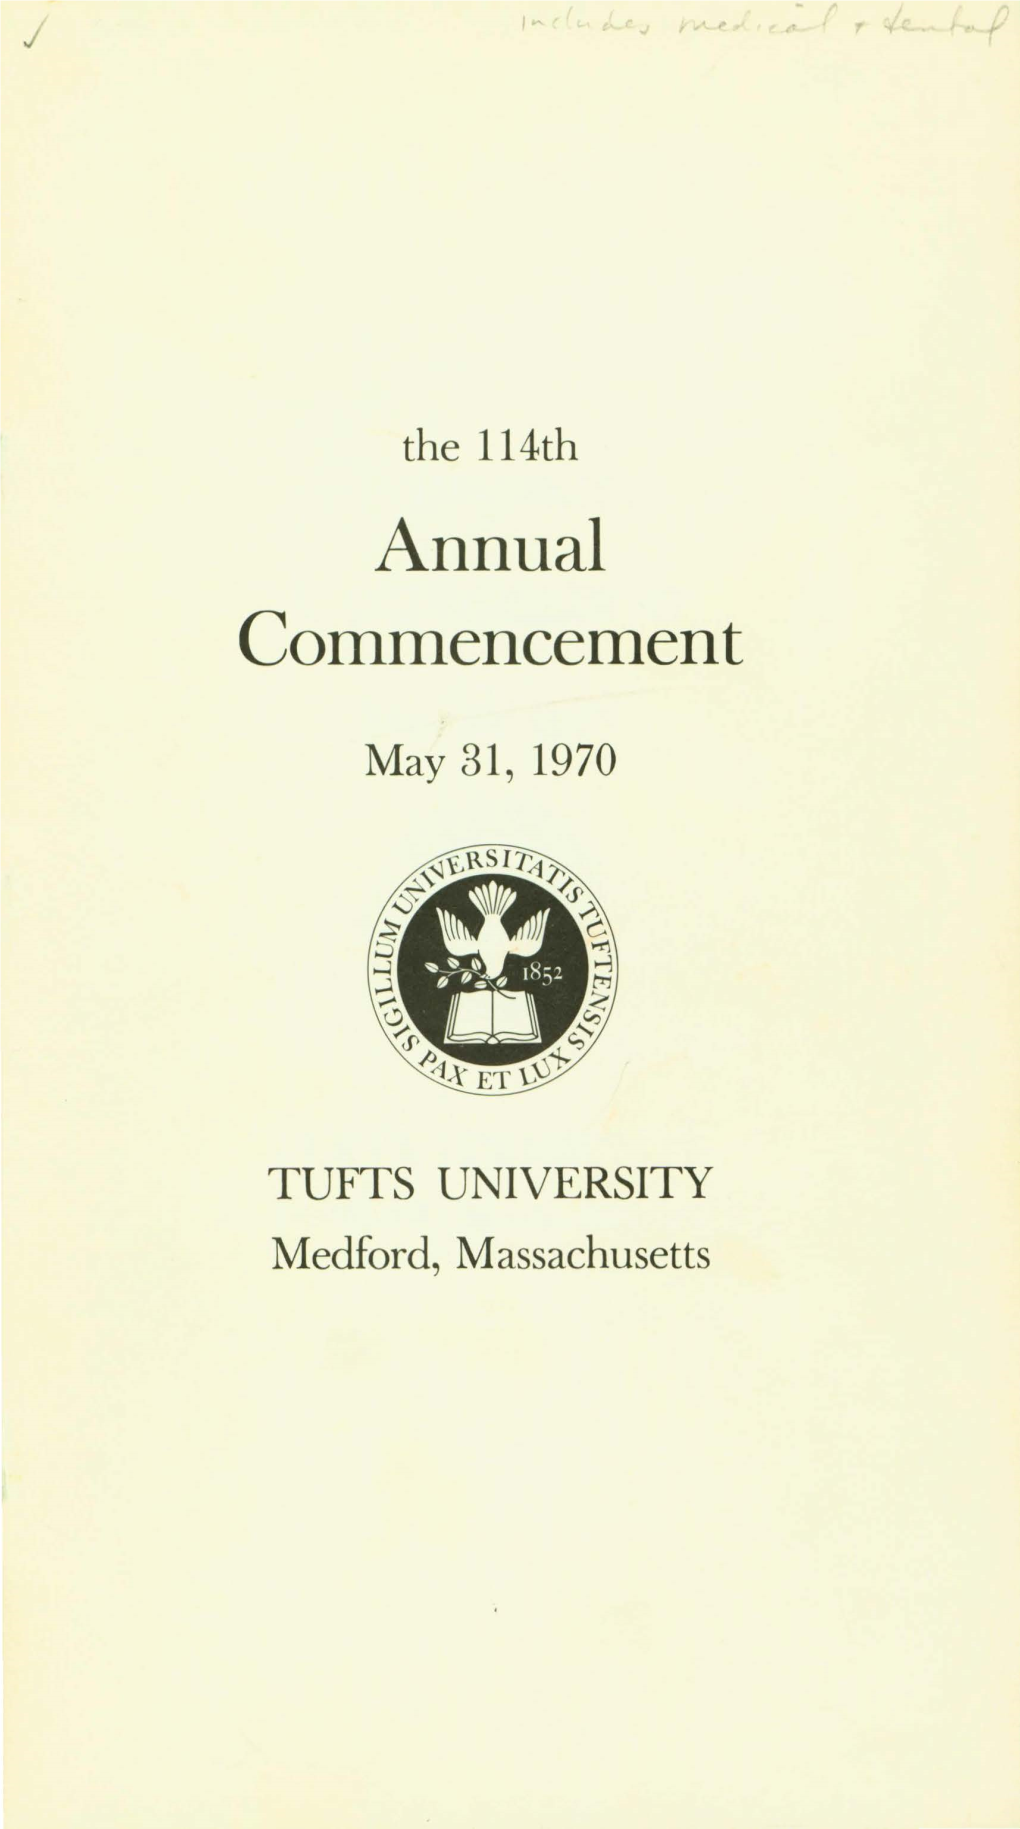 Annual Commencement